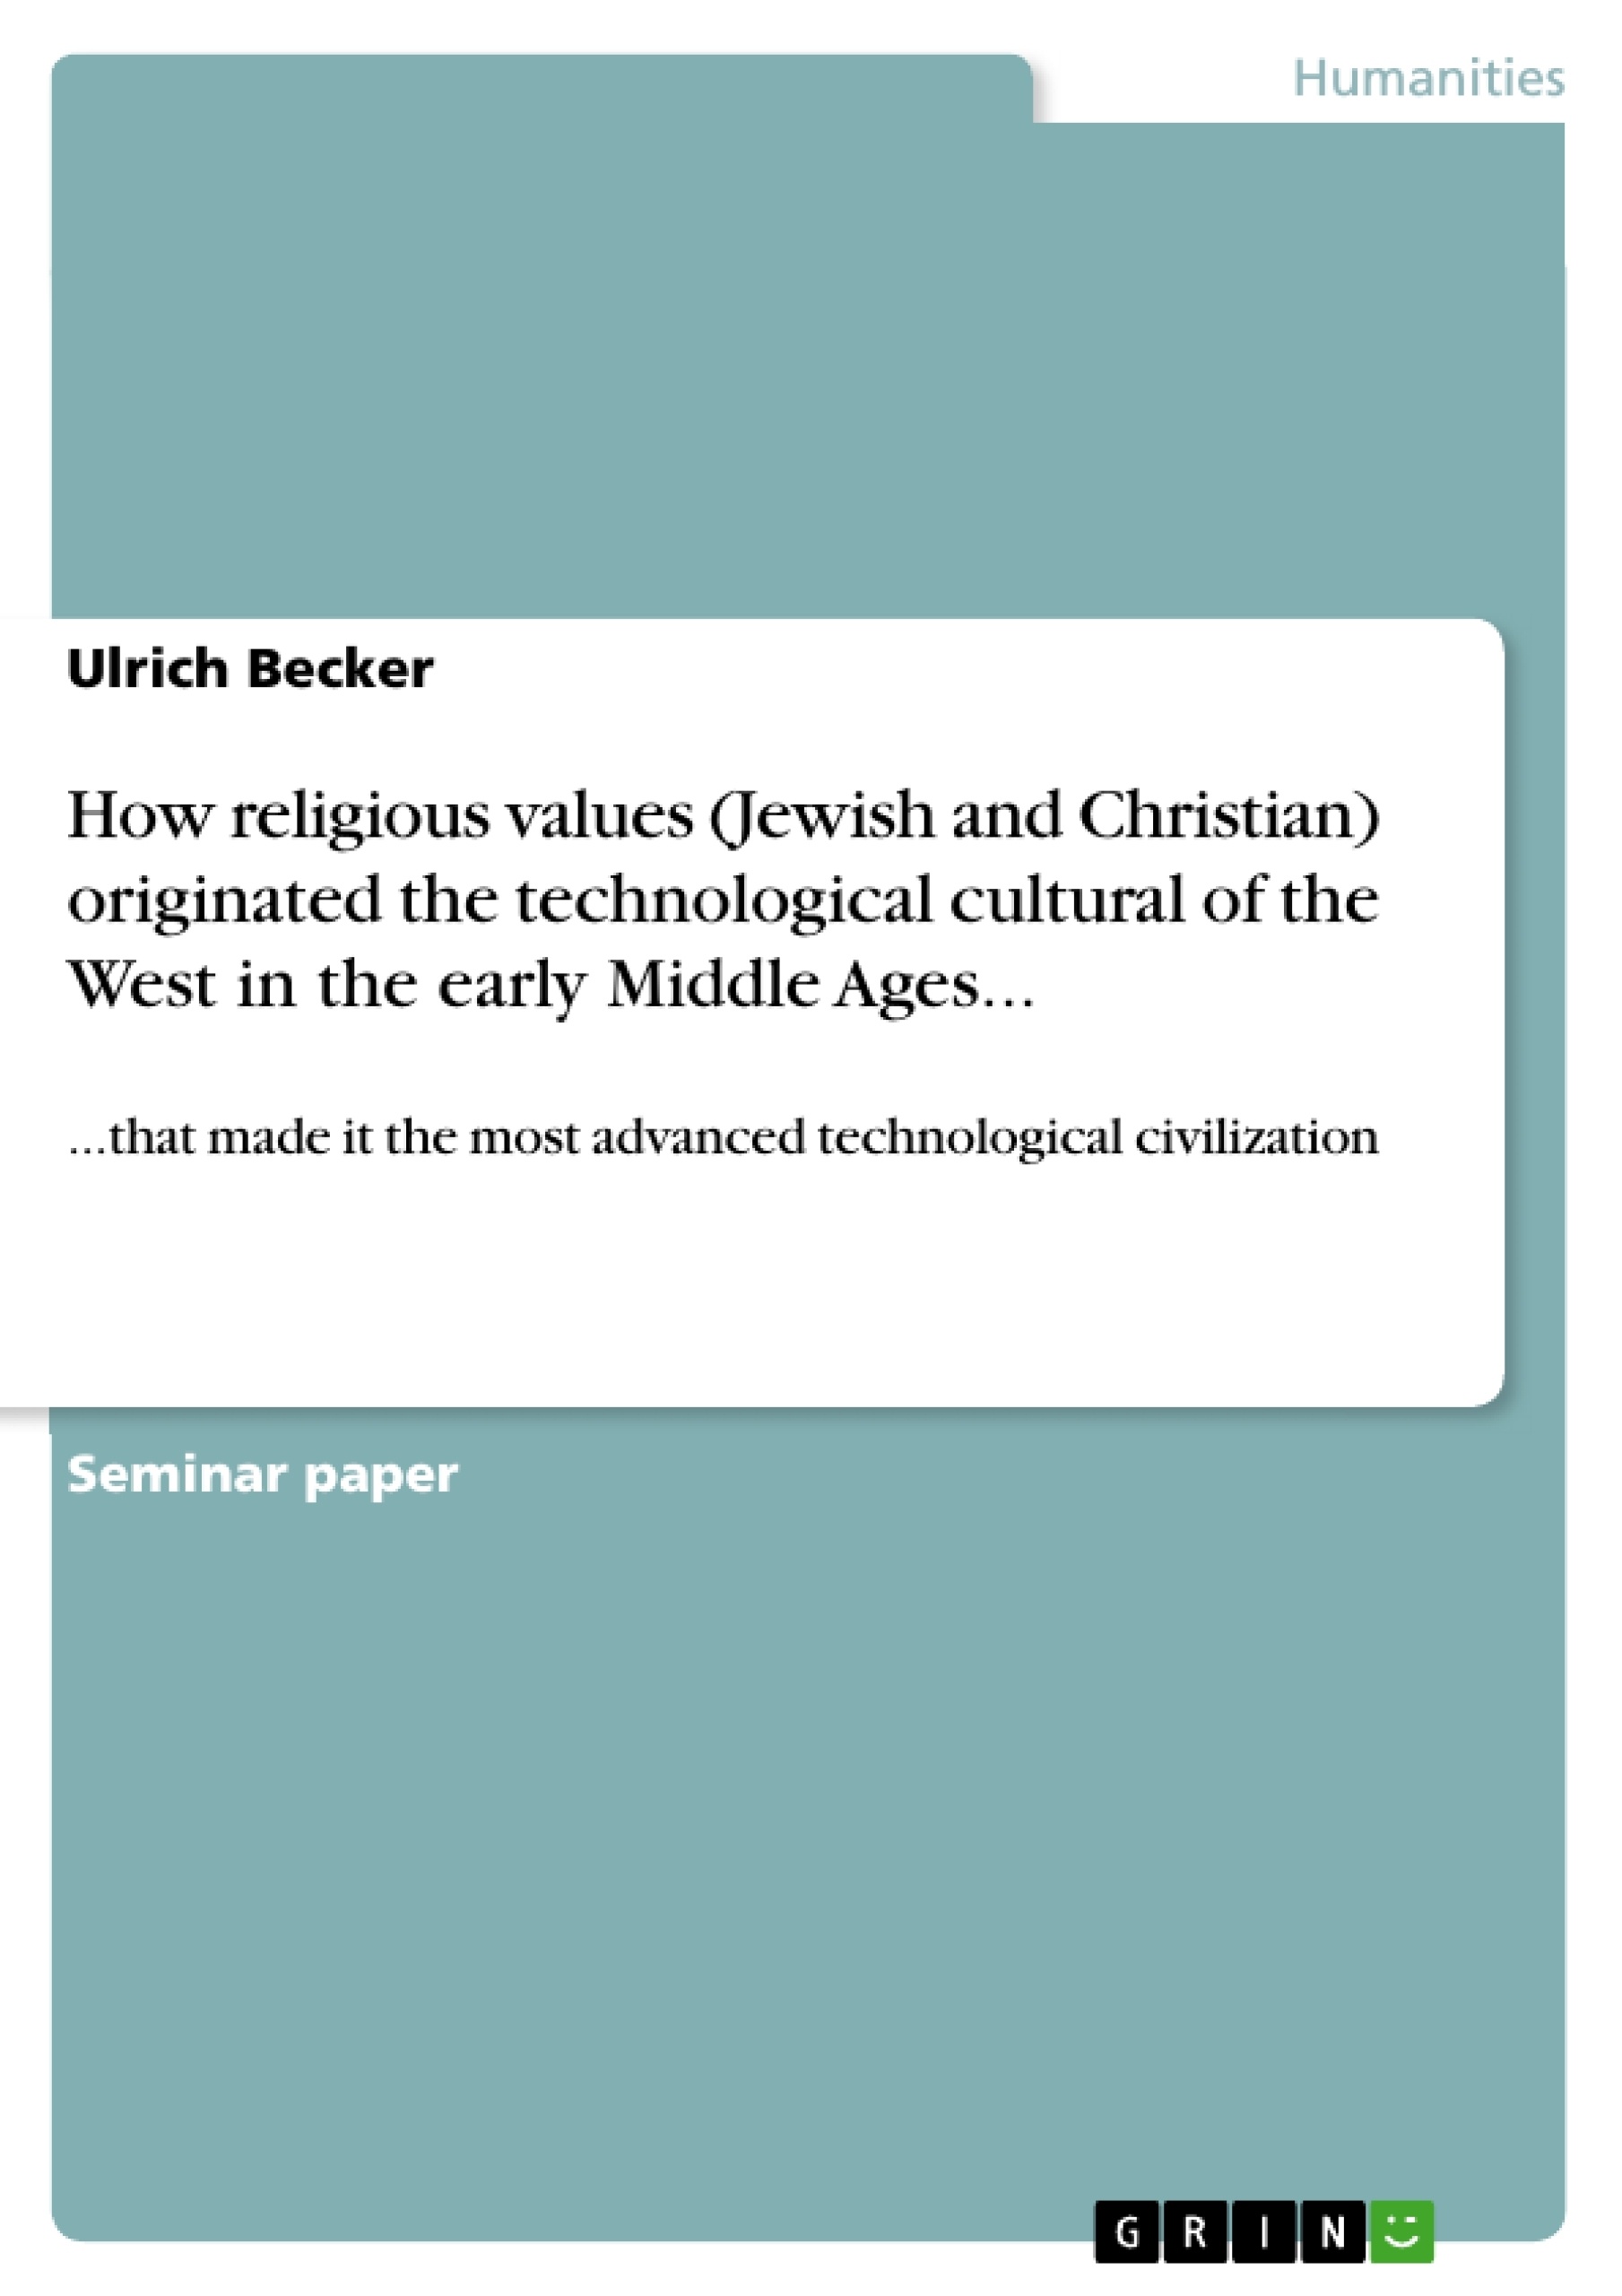 Titre: How religious values (Jewish and Christian) originated the technological cultural of the West in the early Middle Ages...